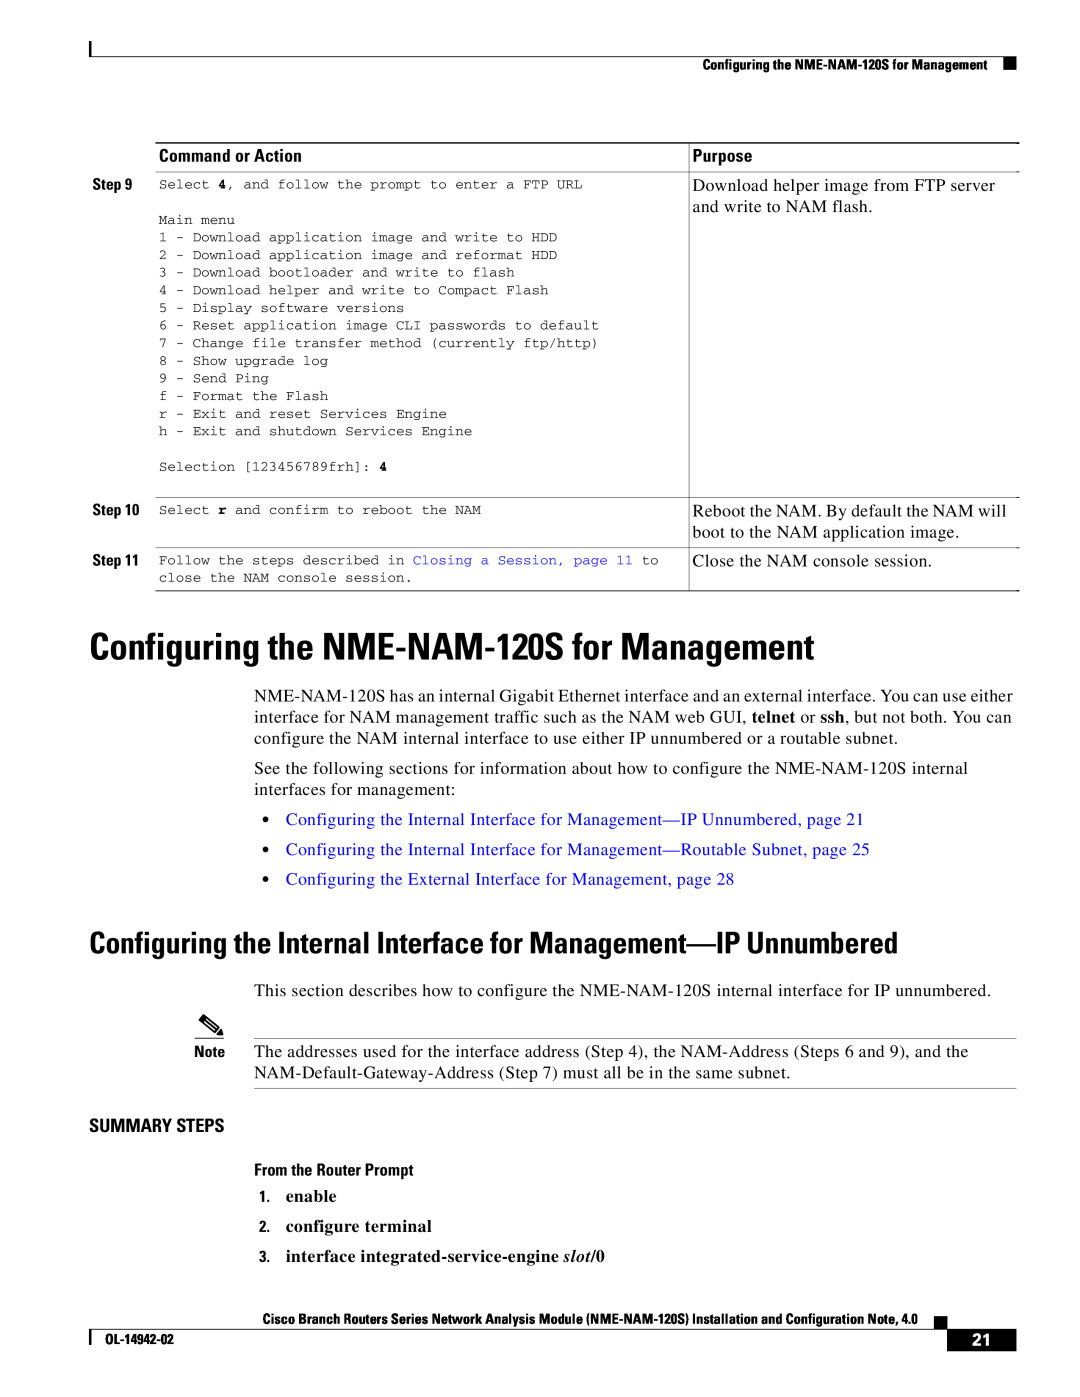 Cisco Systems SMNMADPTR manual Configuring the NME-NAM-120S for Management, From the Router Prompt, Summary Steps, Purpose 